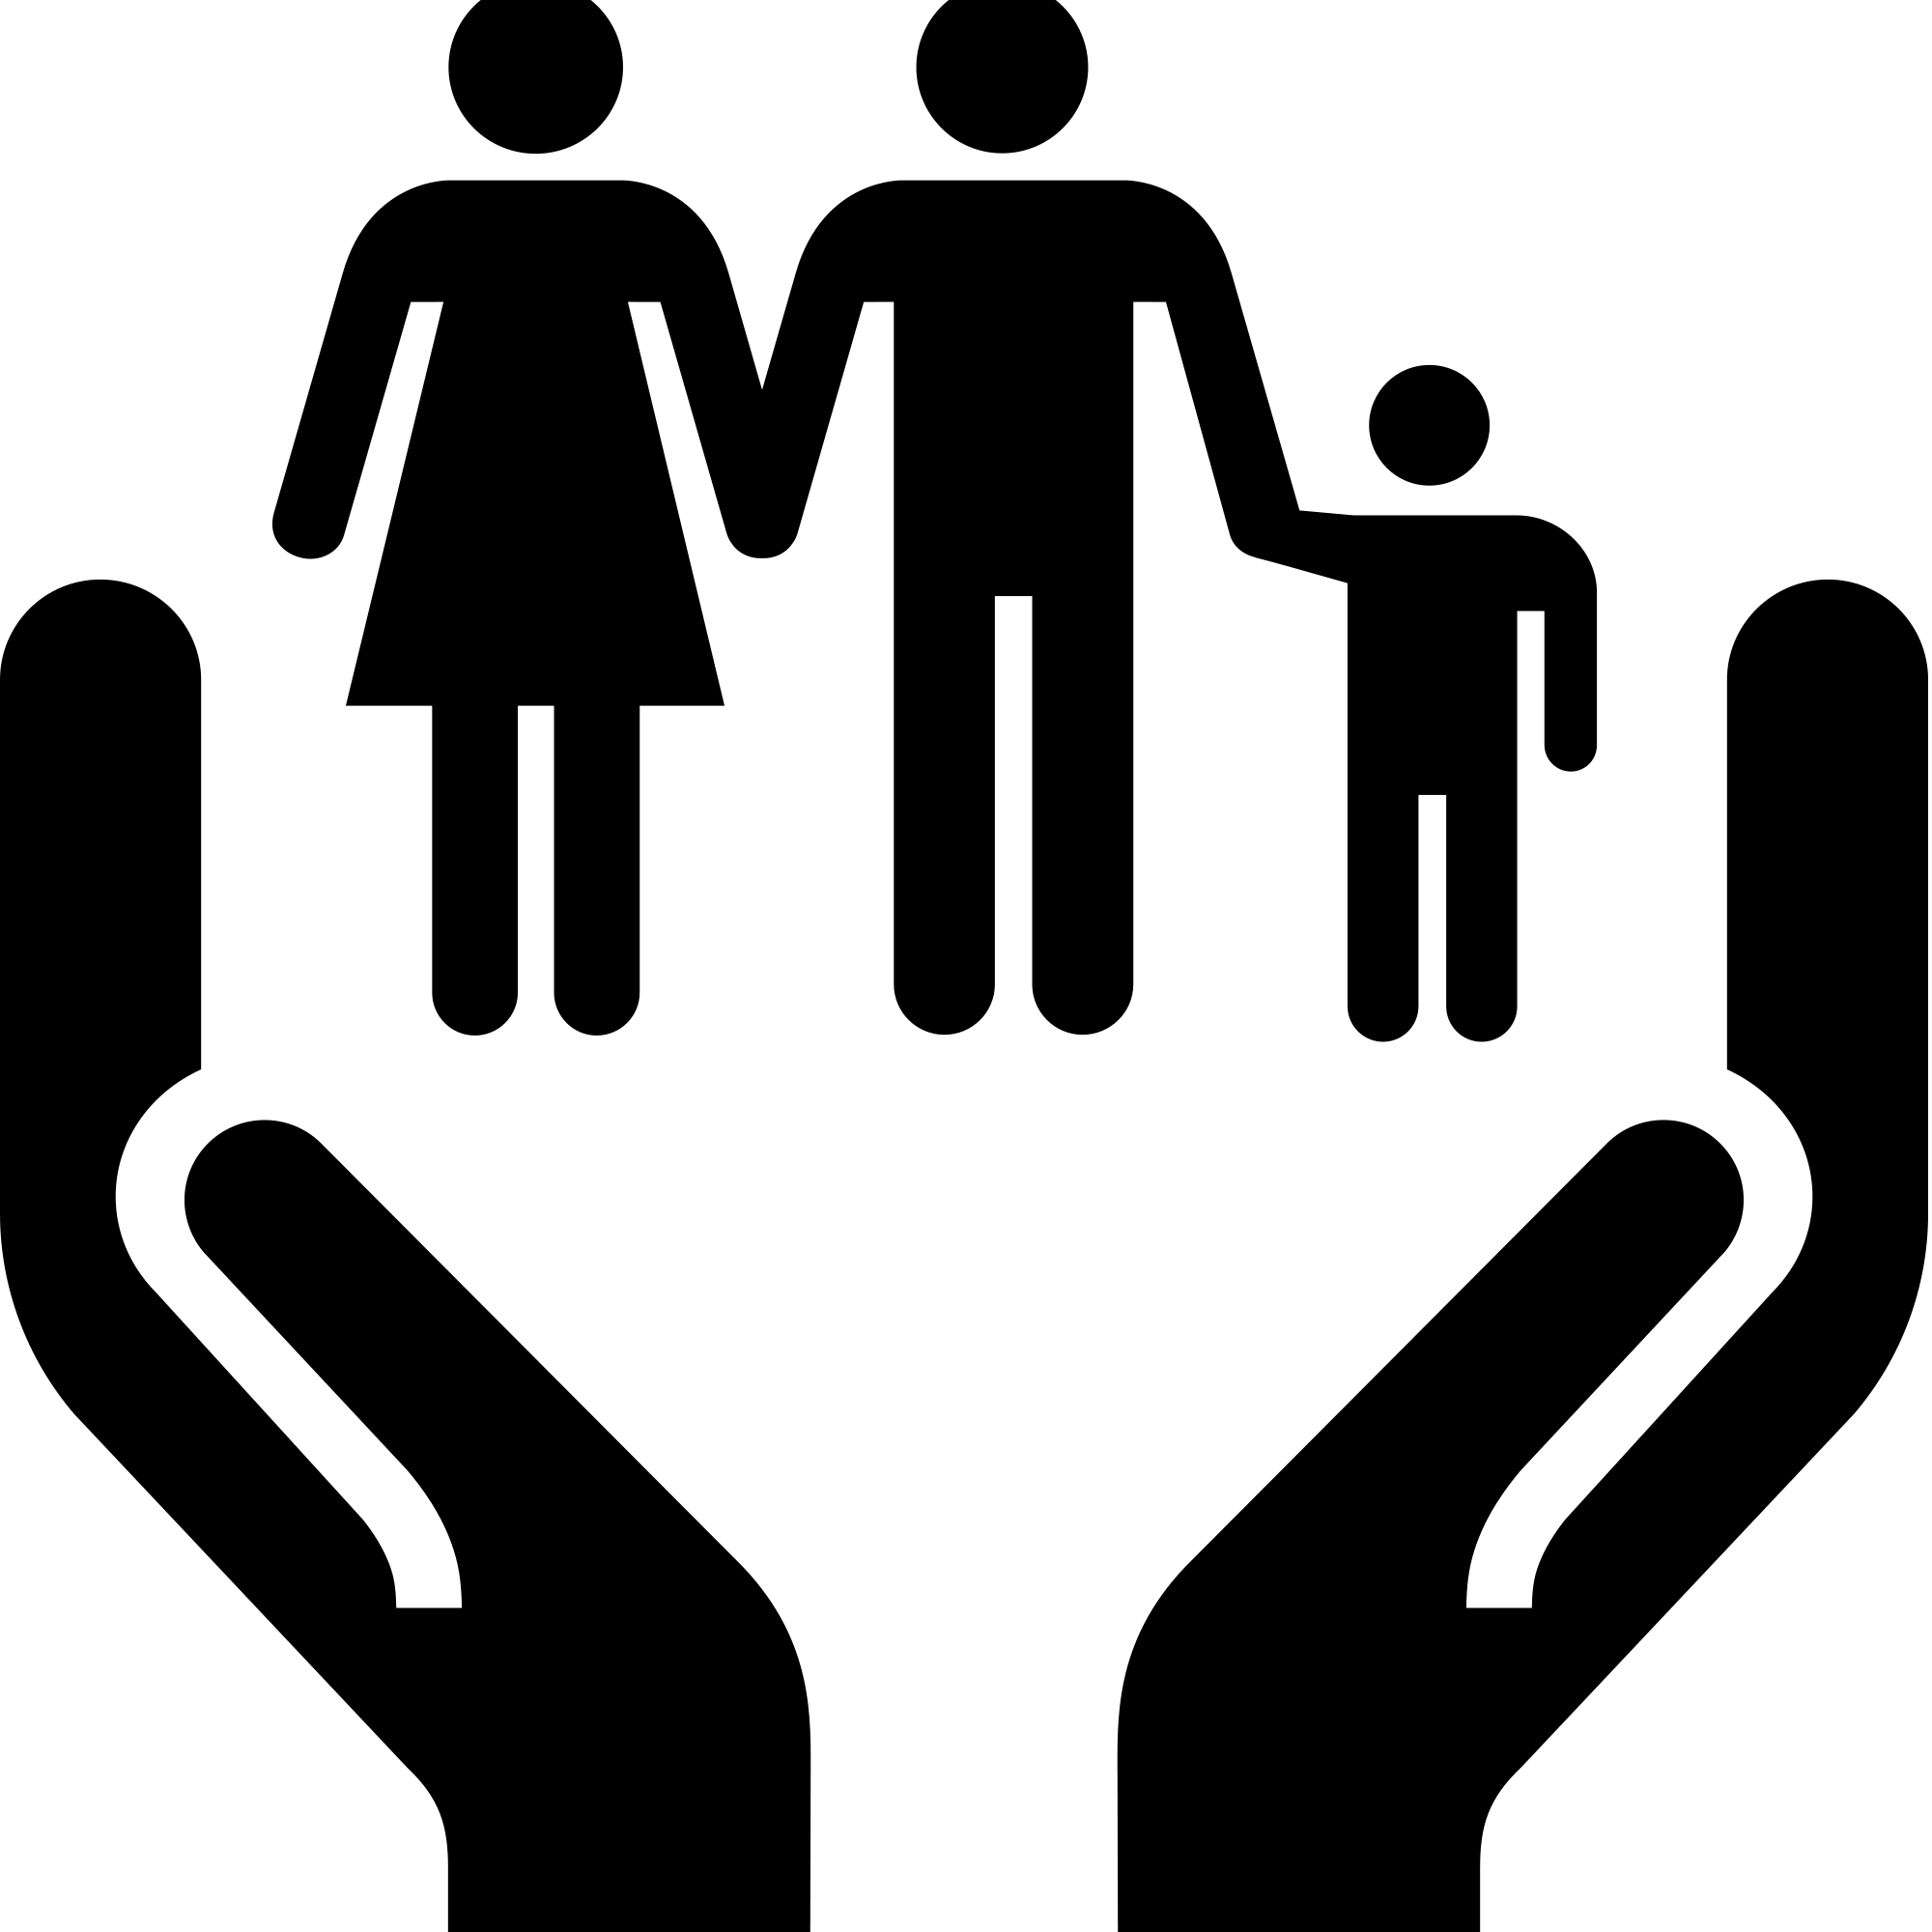 Organization for the Protection of the Rights of Deaf Children and Parents